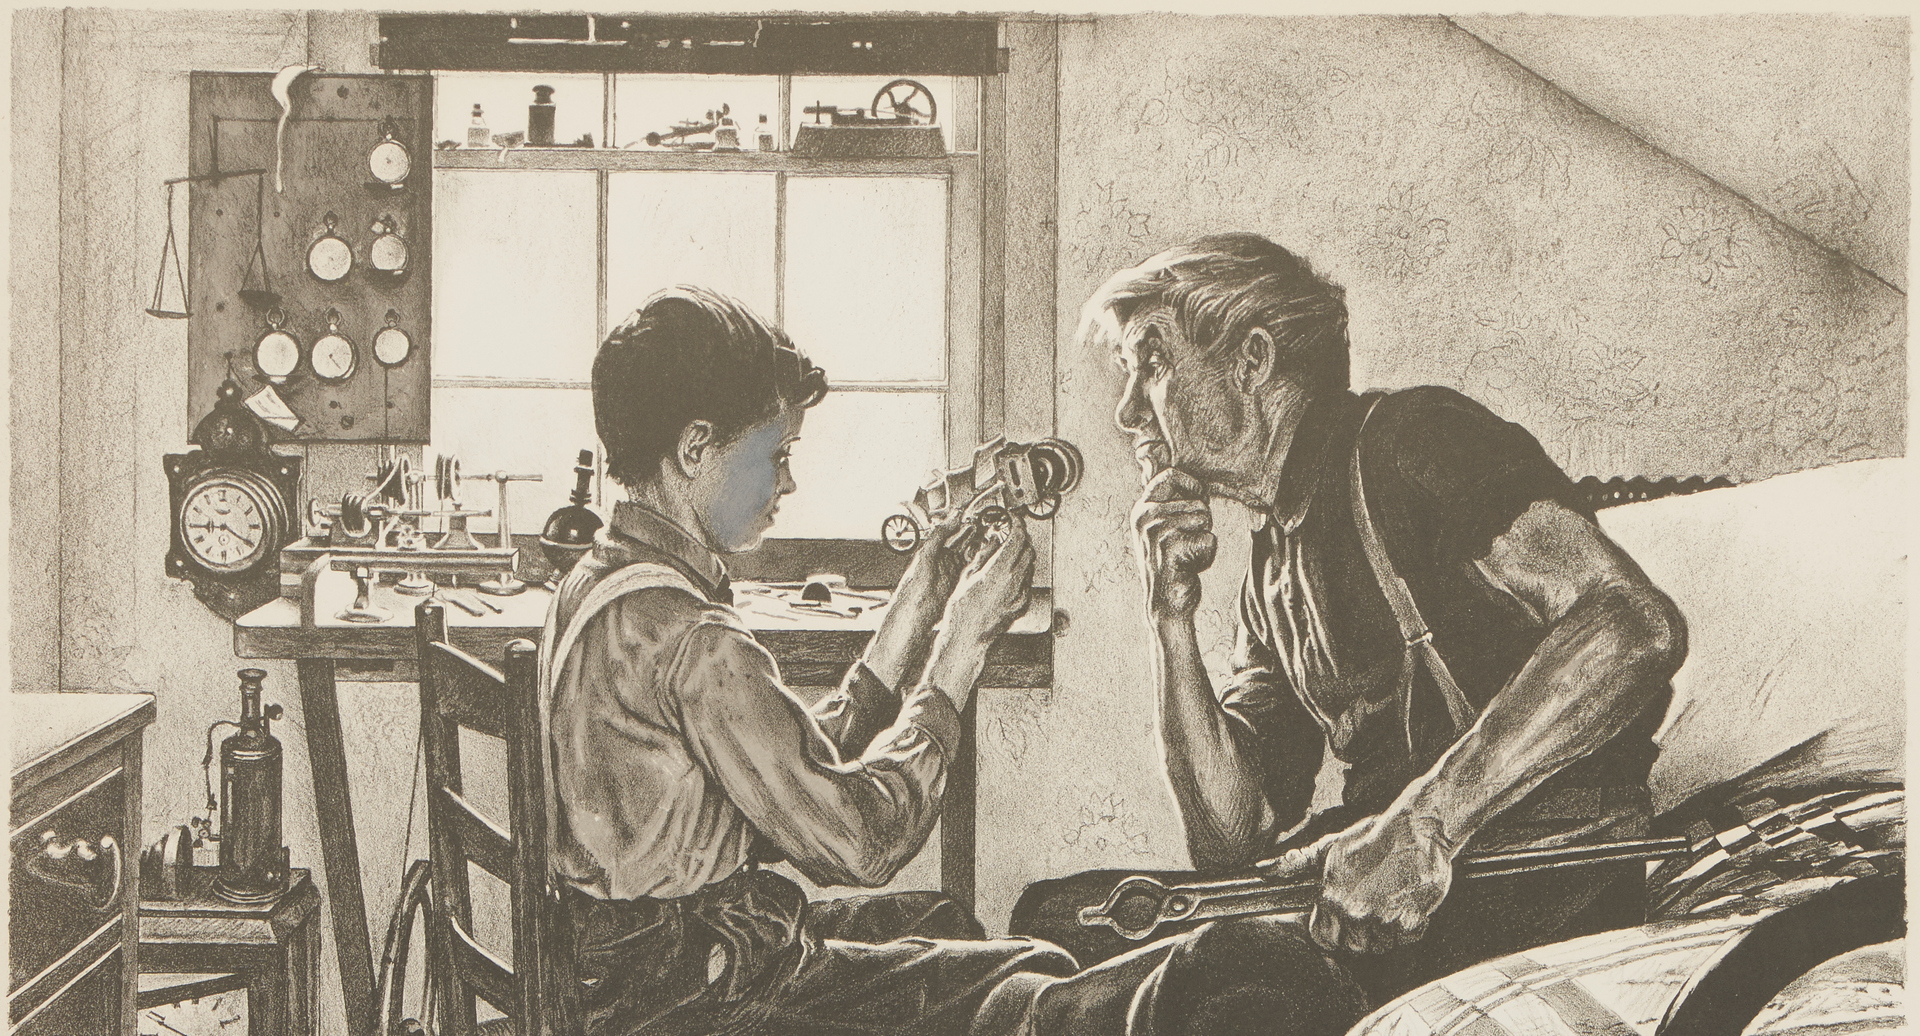 Lot 334: Norman Rockwell Signed Lithograph, The Boy Who Put the World on Wheels